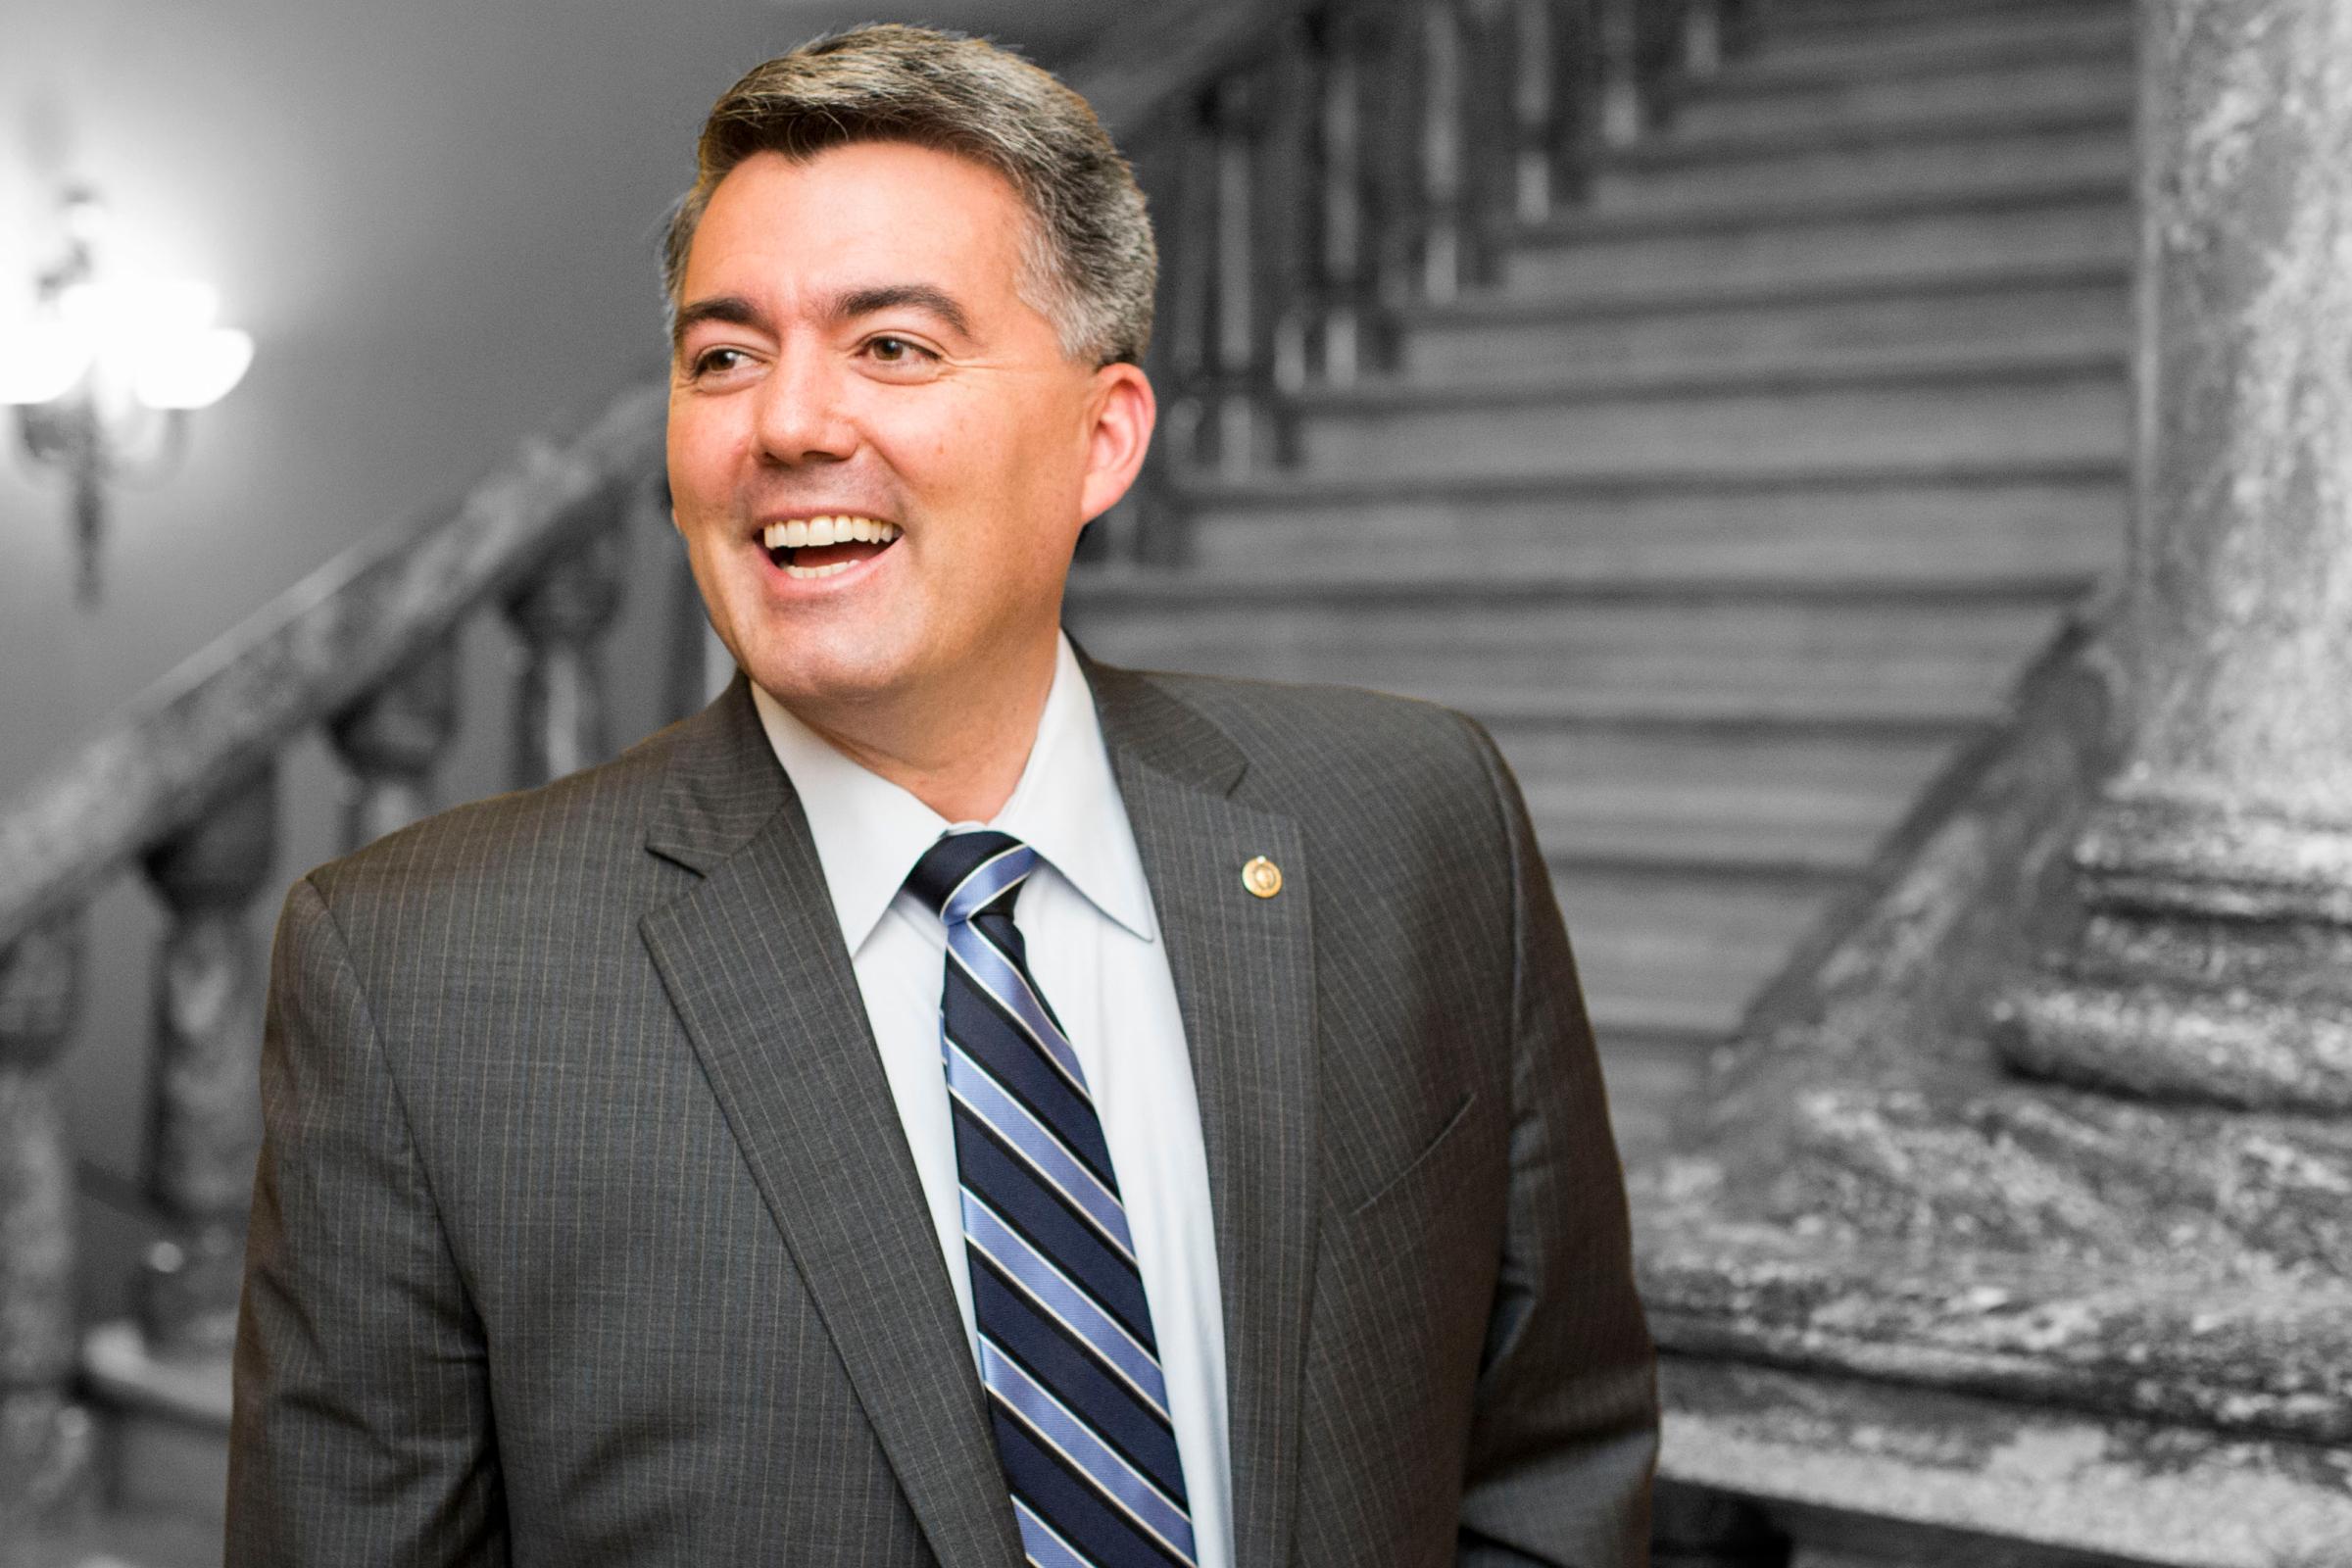 Cory Gardner The Colorado Senator showed how Republicans can win in a purple state in 2014 by countering attempts to paint him as unsupportive of women's concerns. When the dust from the GOP primary settles, the eventual presidential candidate may follow his lead.